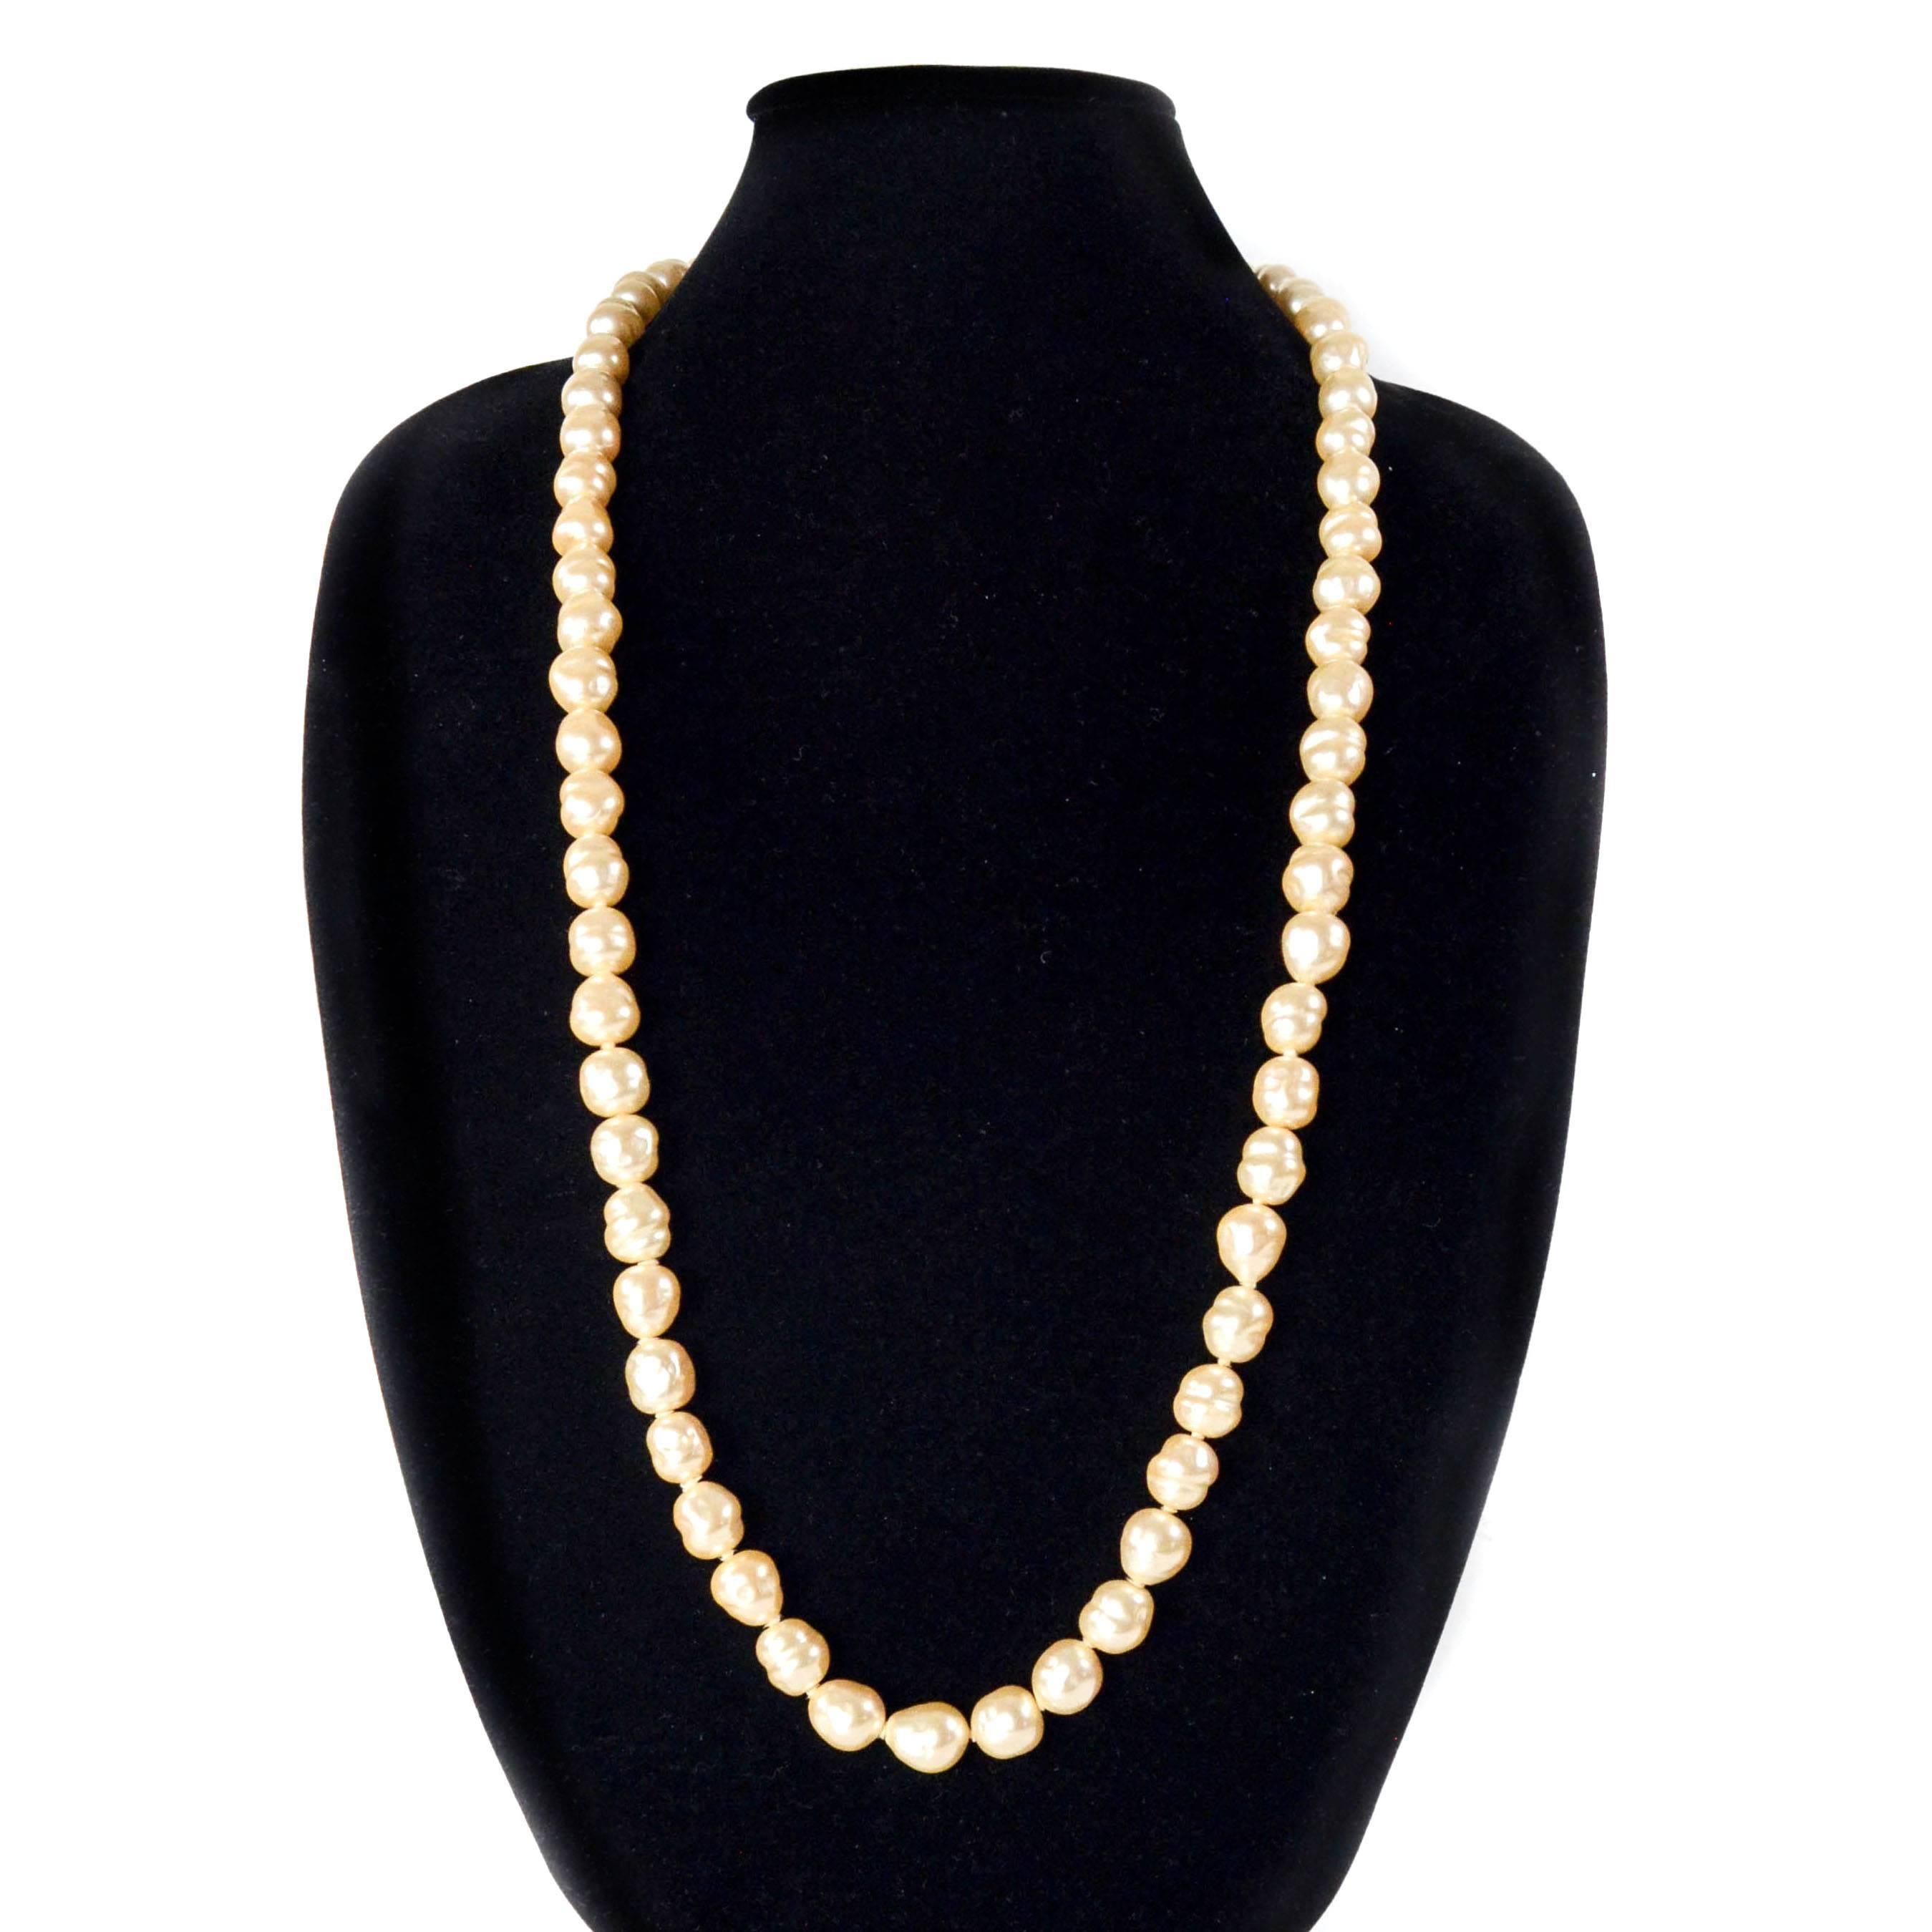 Chanel - Pearl Long Vintage Necklace

Color: White

Material: Pearl Beads

------------------------------------------------------------

Details:

- gold tone hardware

- can be worn single or double wrapped around neck

- stamped 1981

- item